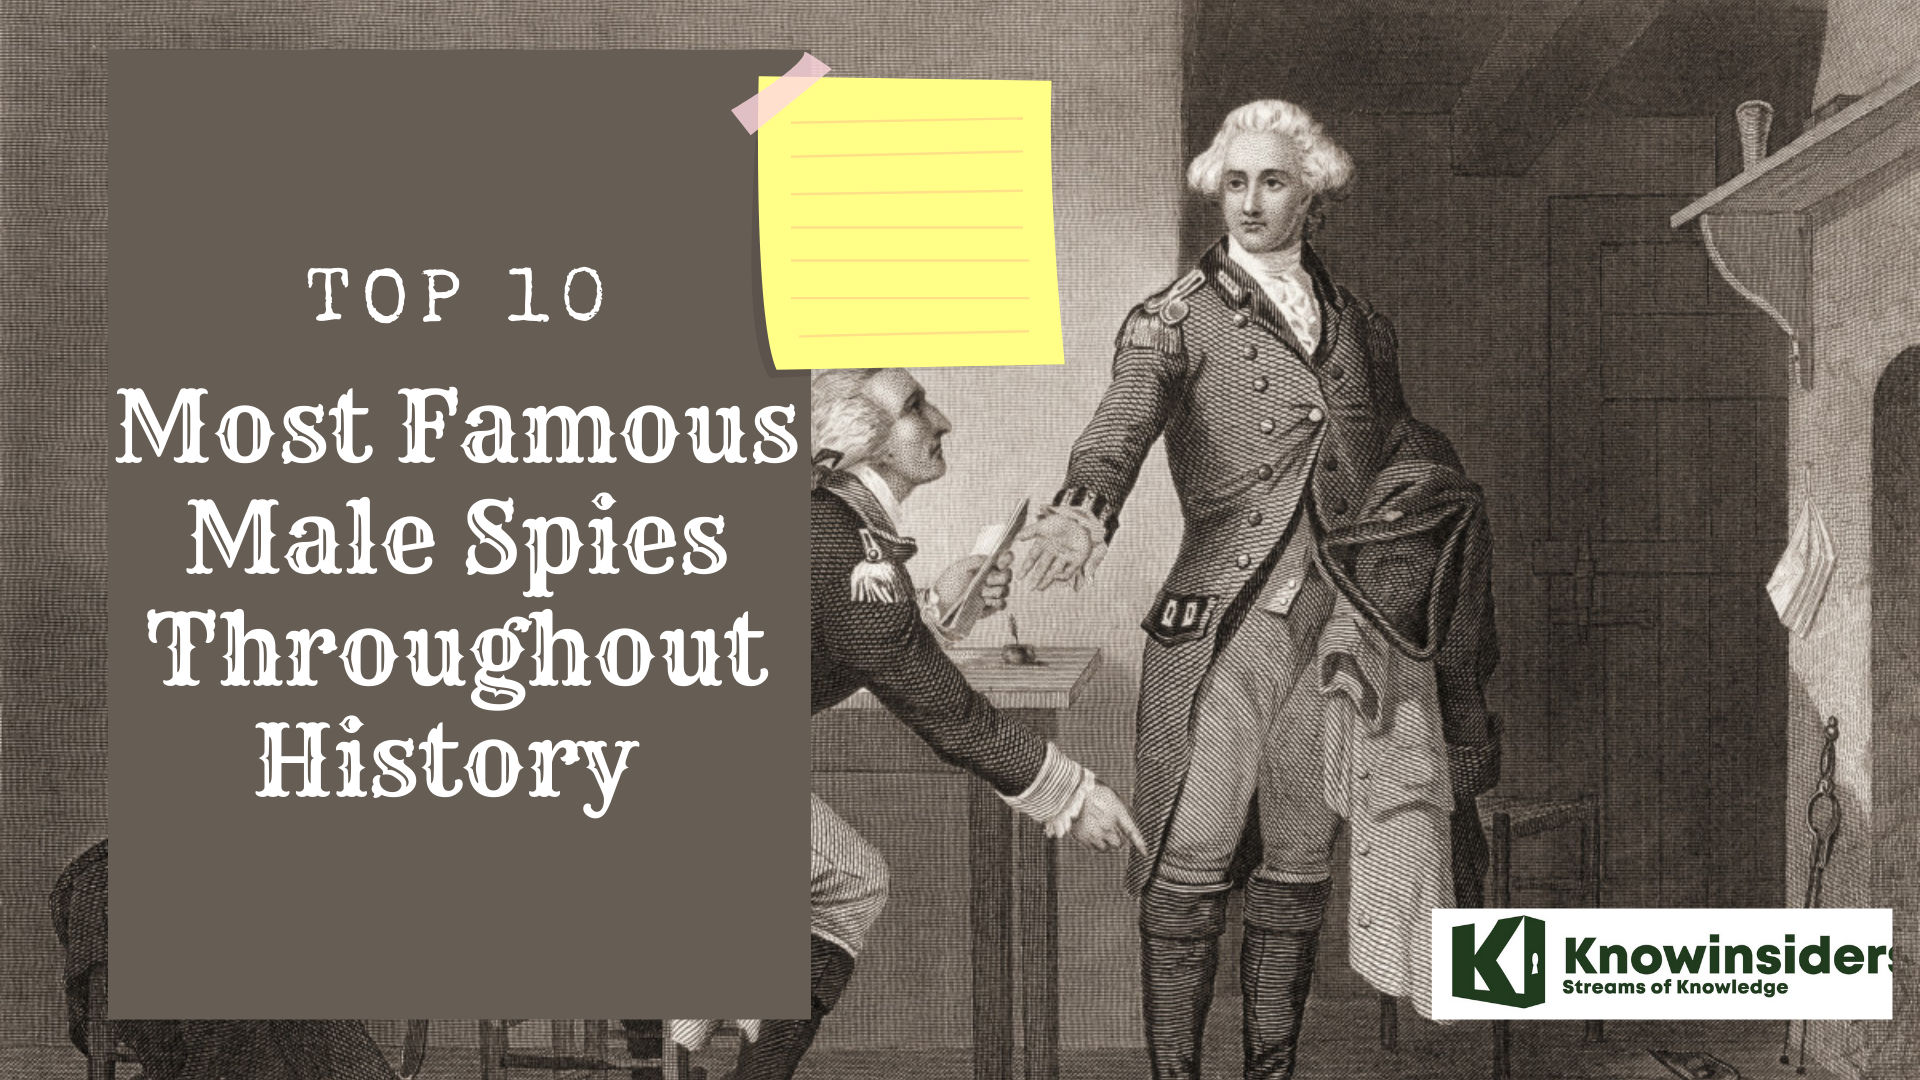 Top 10 most famous male spies throughout history 